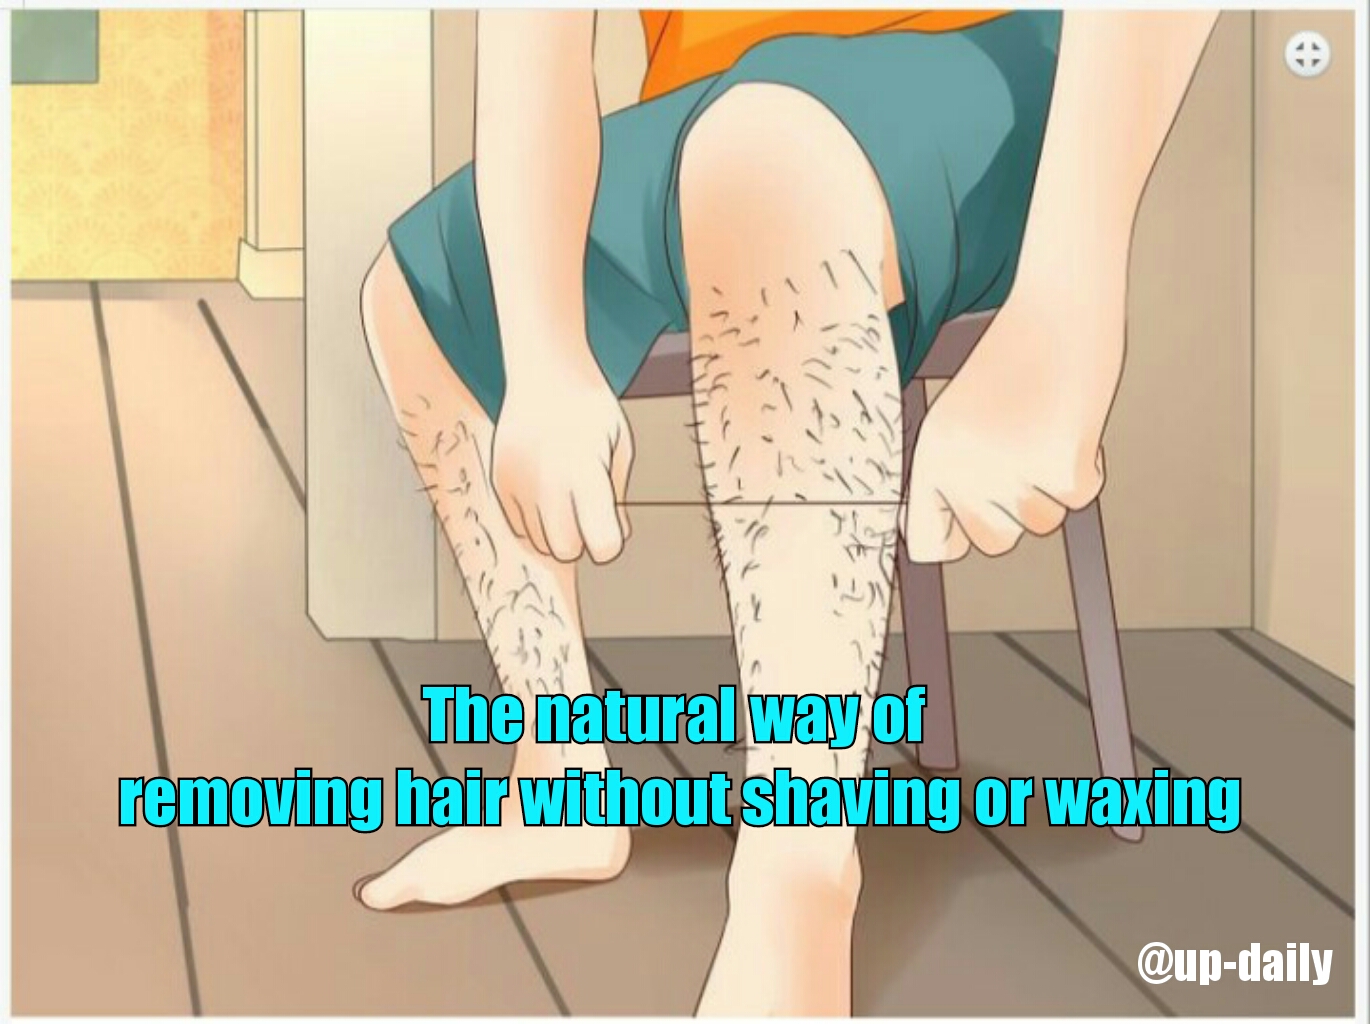 The Natural Way of Removing Hair Without Shaving or Waxing.